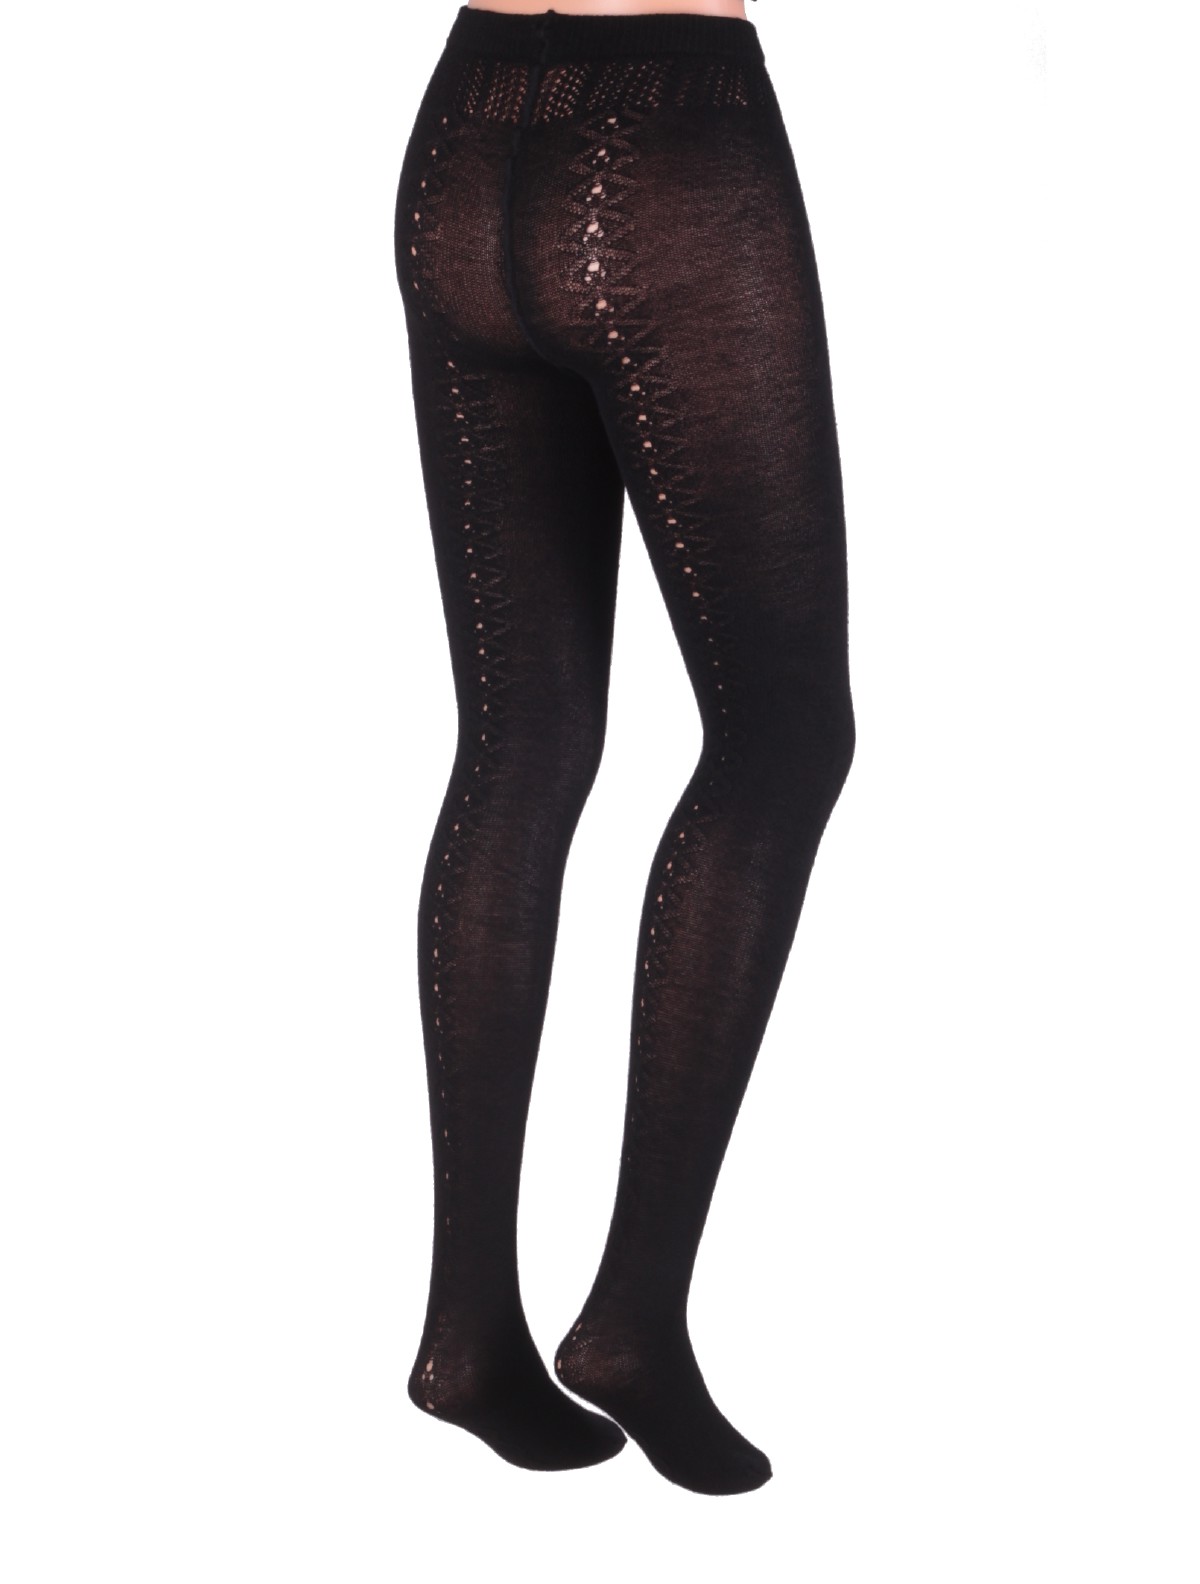 Dolci Calze Countryside Wool Tights